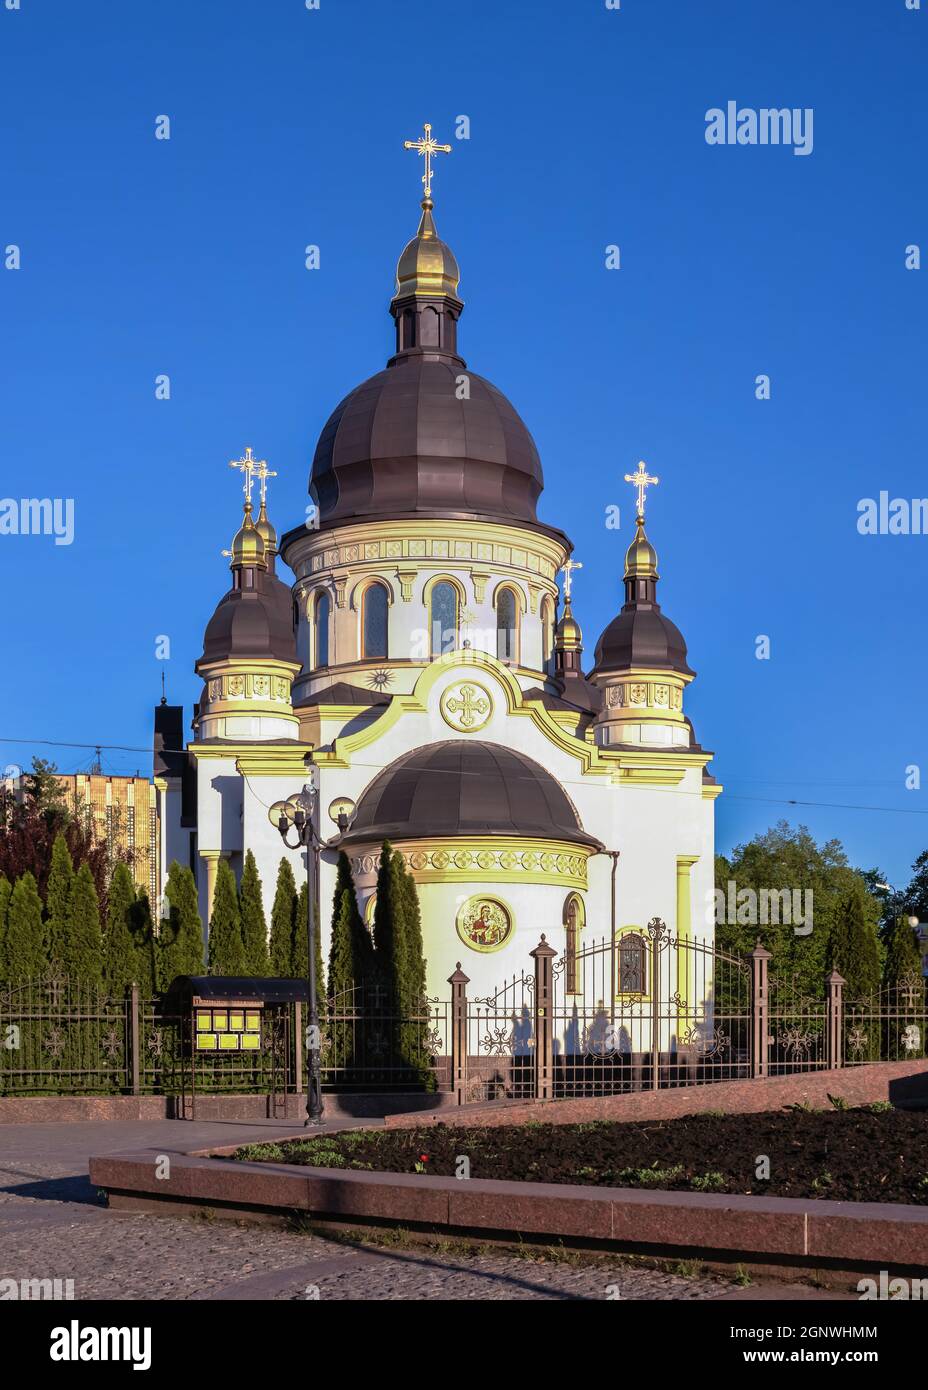 05.09.2021. Kropyvnytskyi, Ukraine. Cathedral Church of the Annunciation of the Most Holy Theotokos in Kropyvnytskyi, Ukraine, on a sunny spring morni Stock Photo